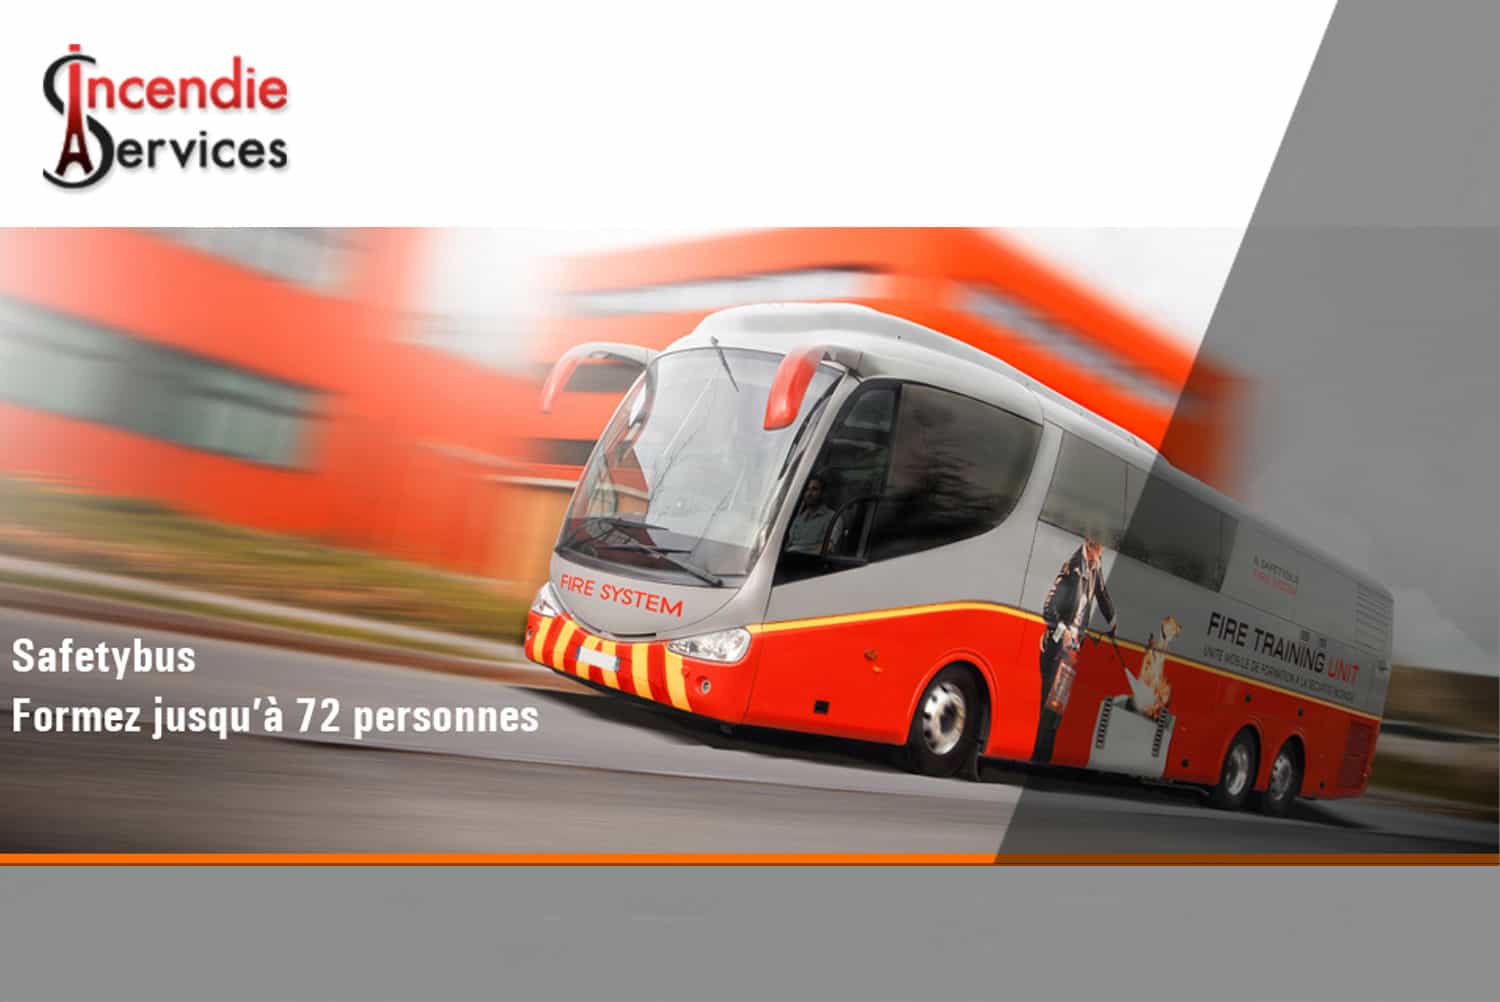 Bus Formation Incendie - SAFETYBUS - "bus formation incendie" - "safetybus" | Incendie Services